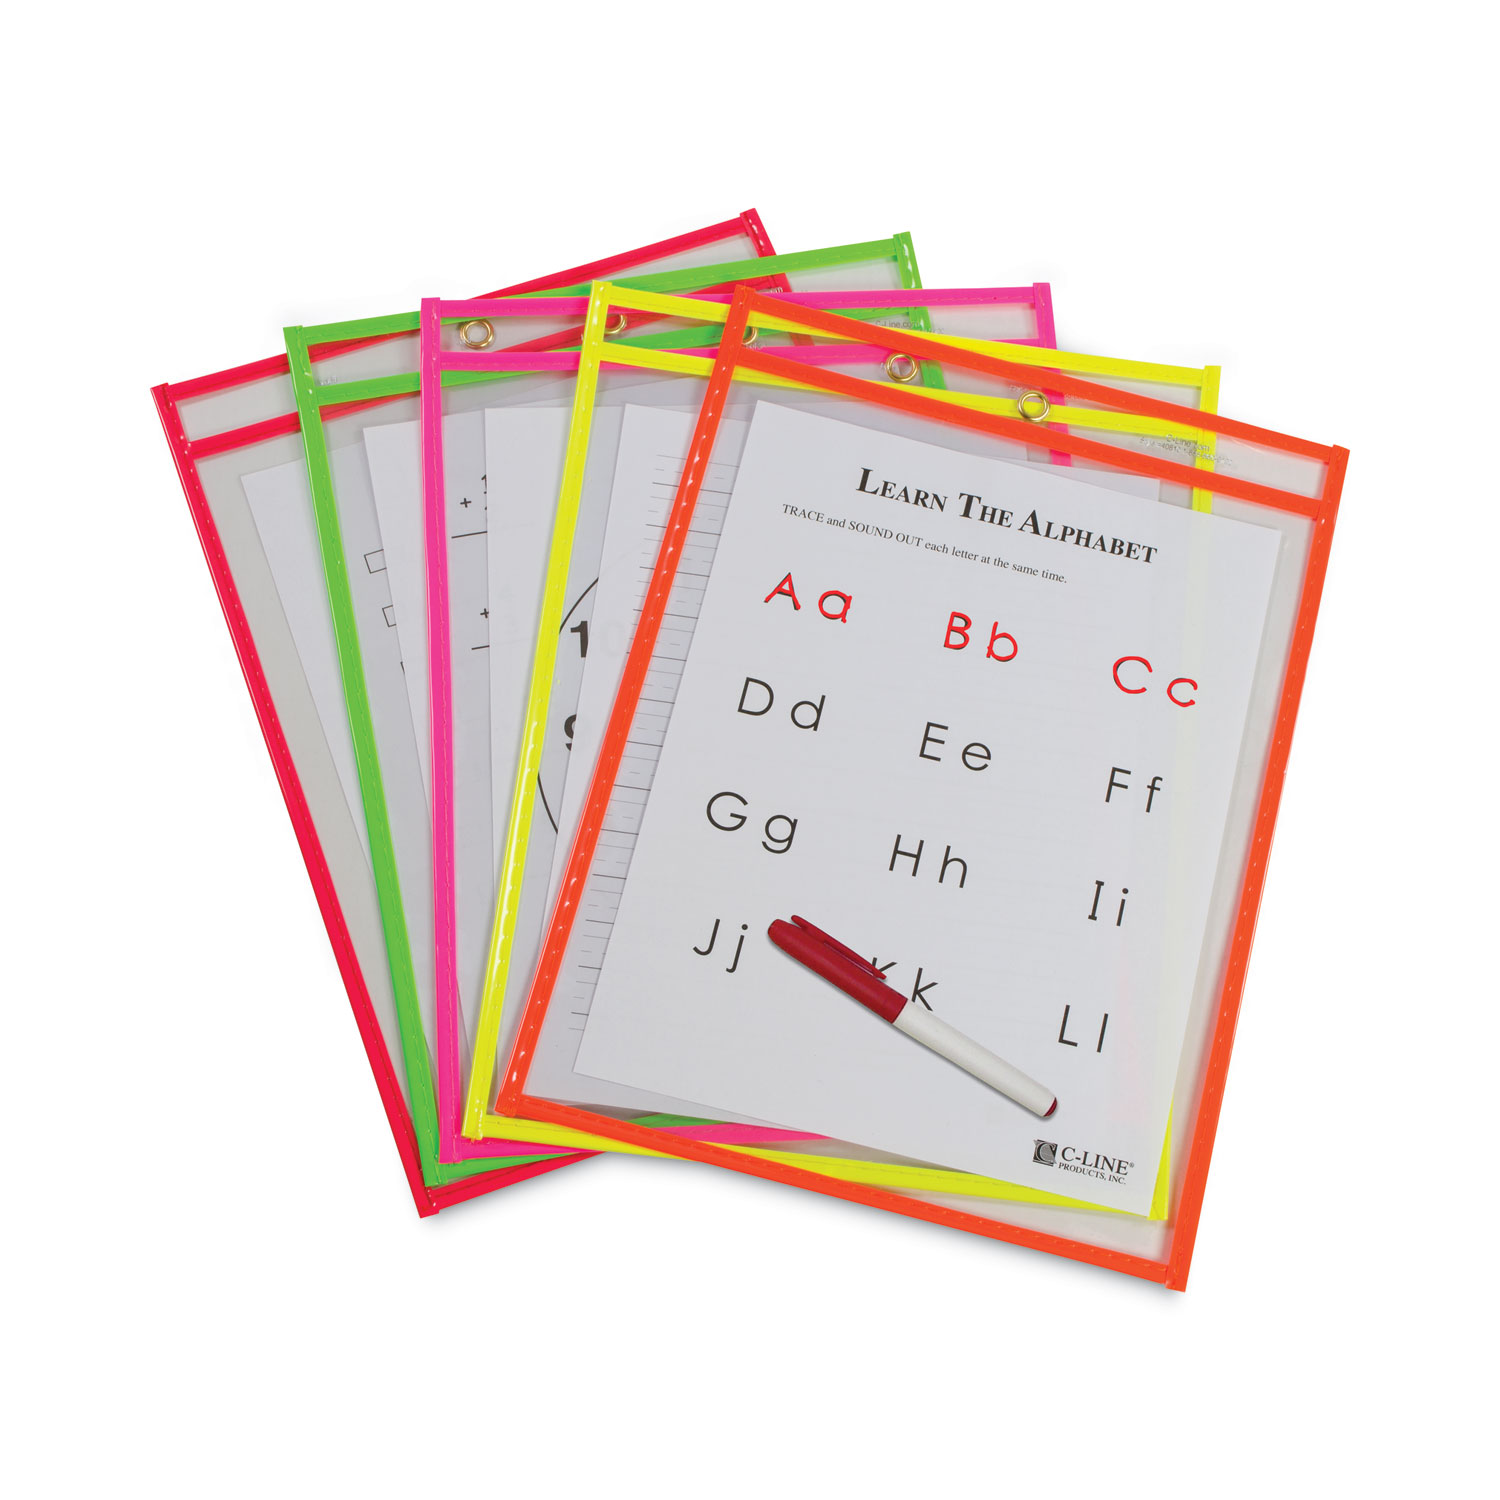 Cli Dry Erase Pockets, Assorted Colors - 10 pockets